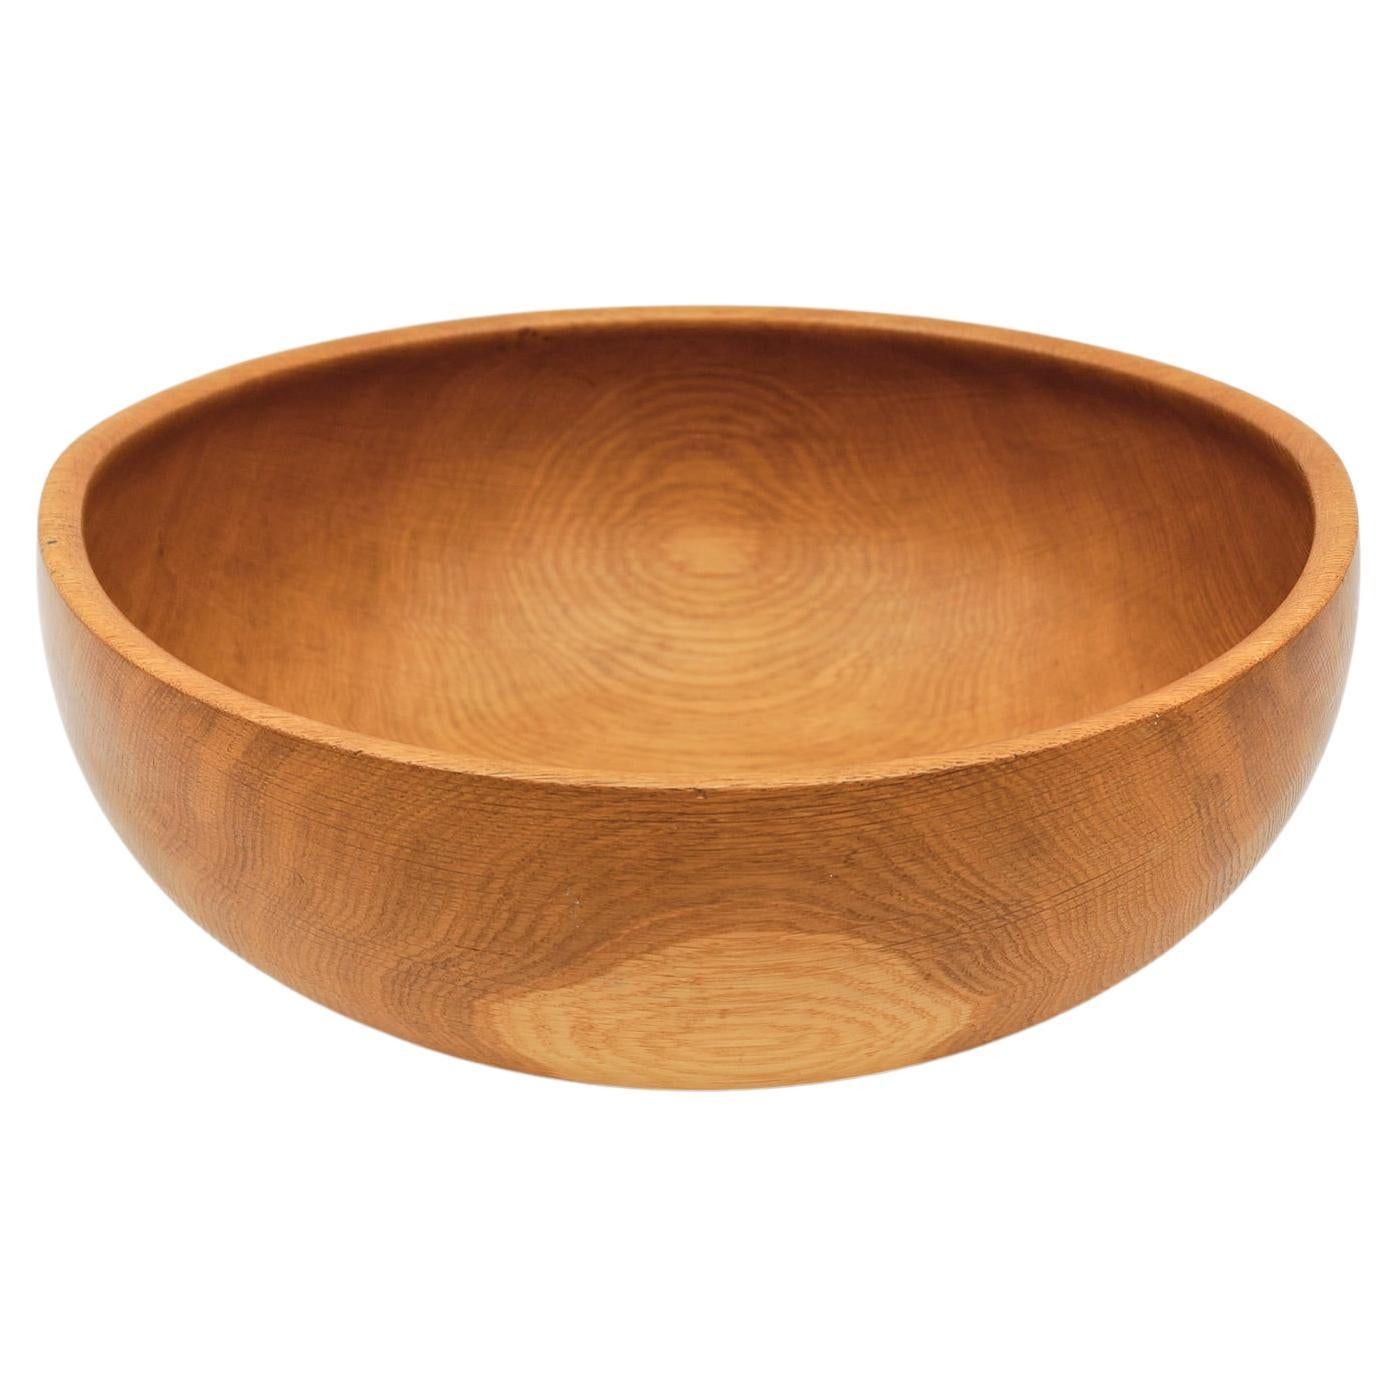 Awesome Huge Mid-Century Modern Oak Bowl by K. Weichselbaum, 1999 Germany For Sale